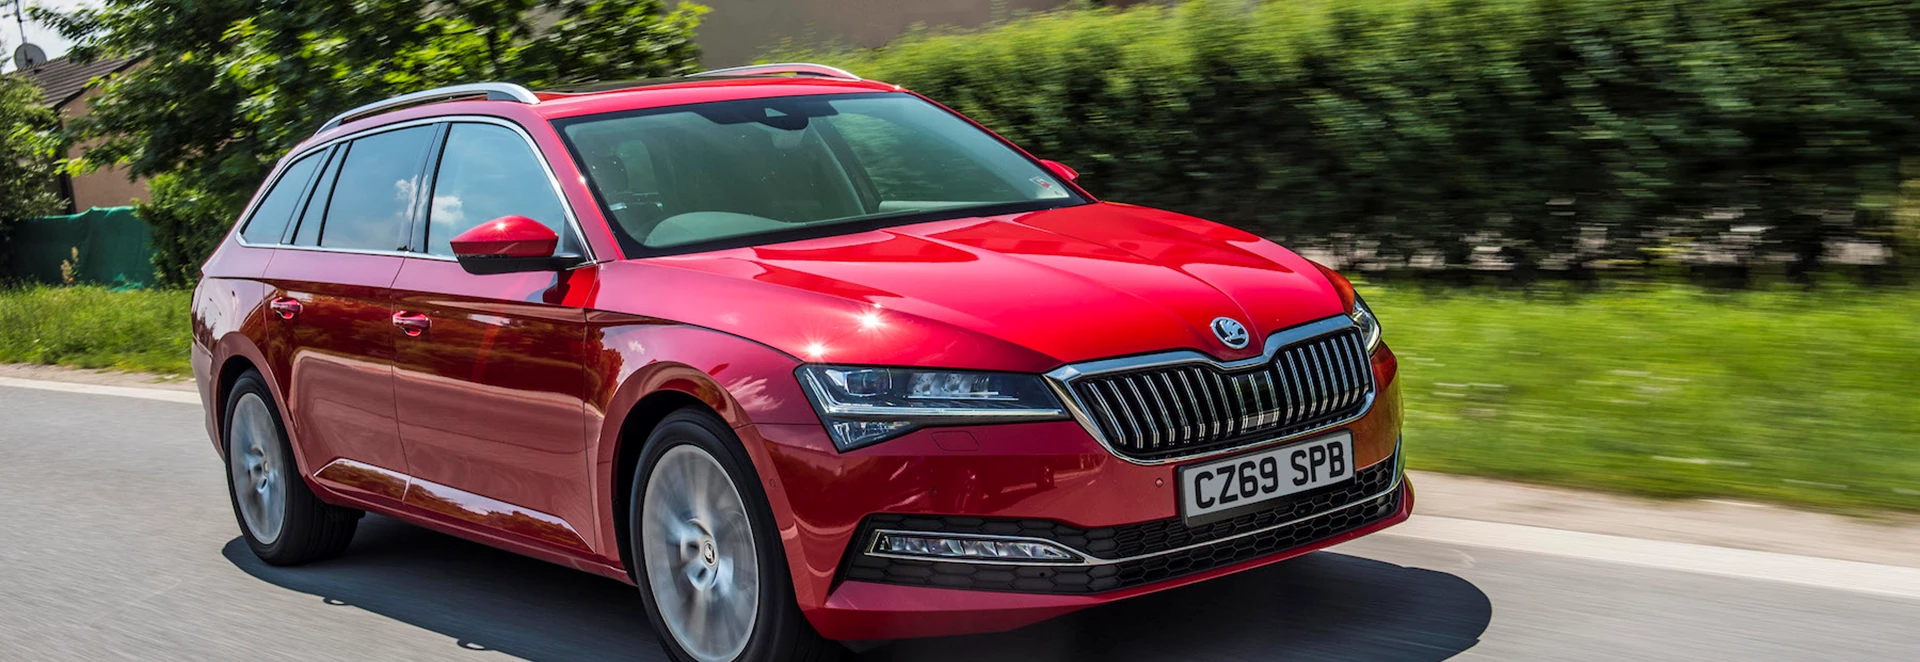 Facelifted SKODA Superb prices and specs announced 